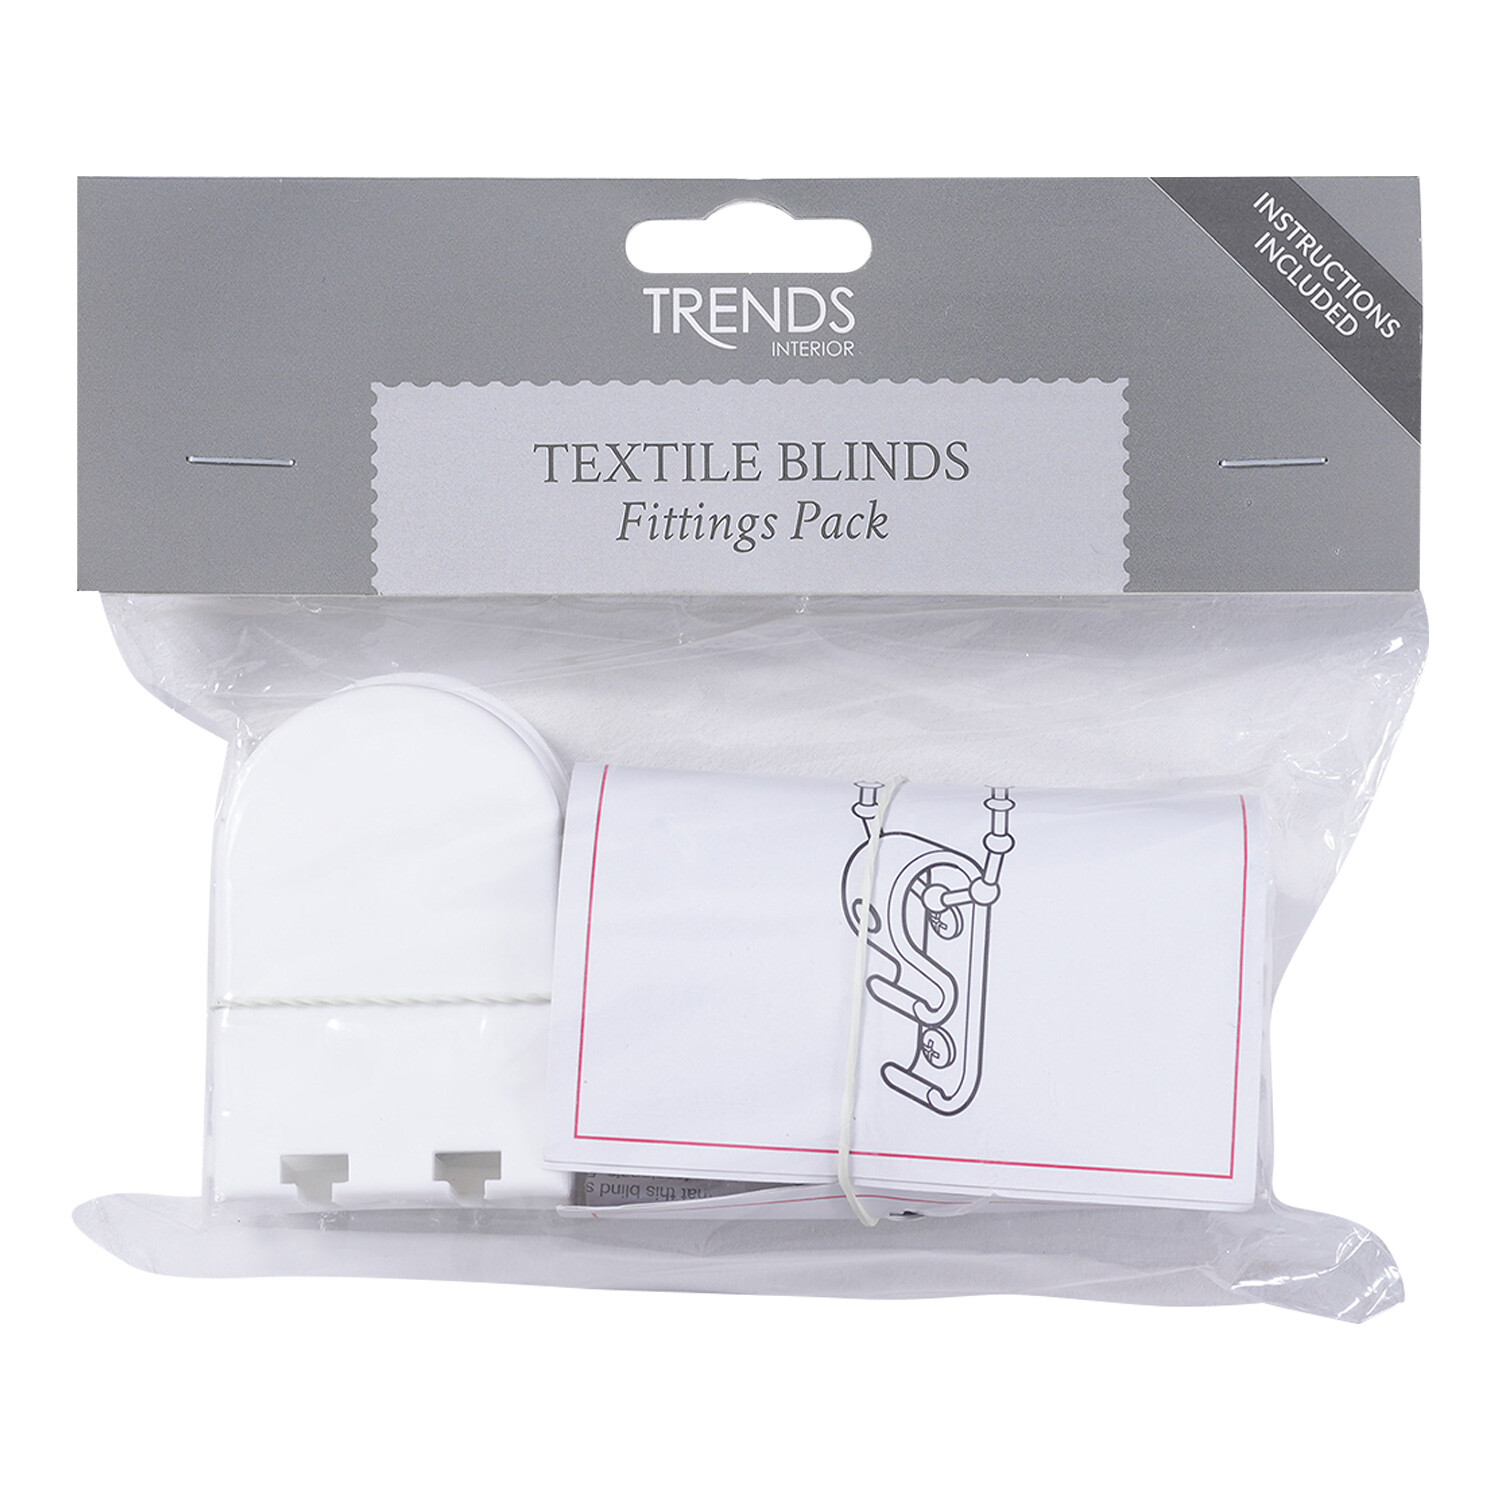 TRENDS Textile Blinds Fittings Pack - White Image